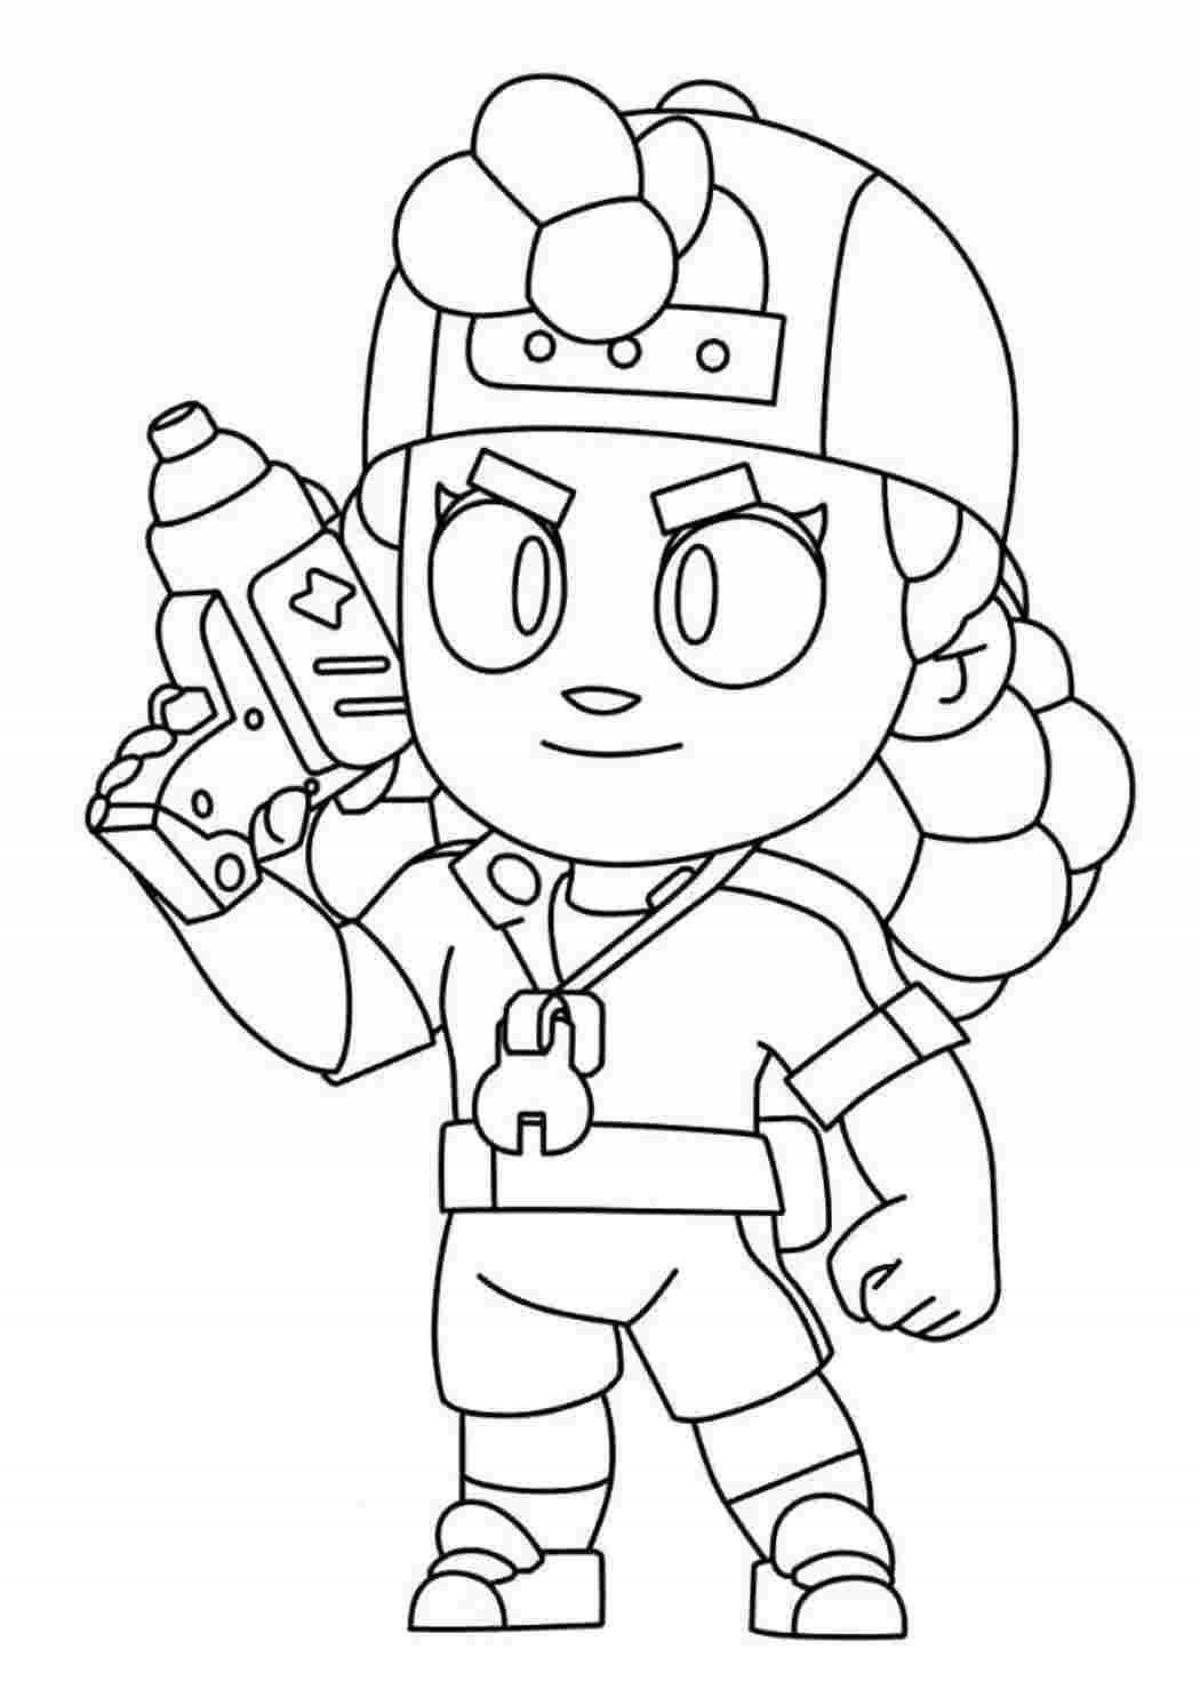 Fairy pins for coloring by brawl stars